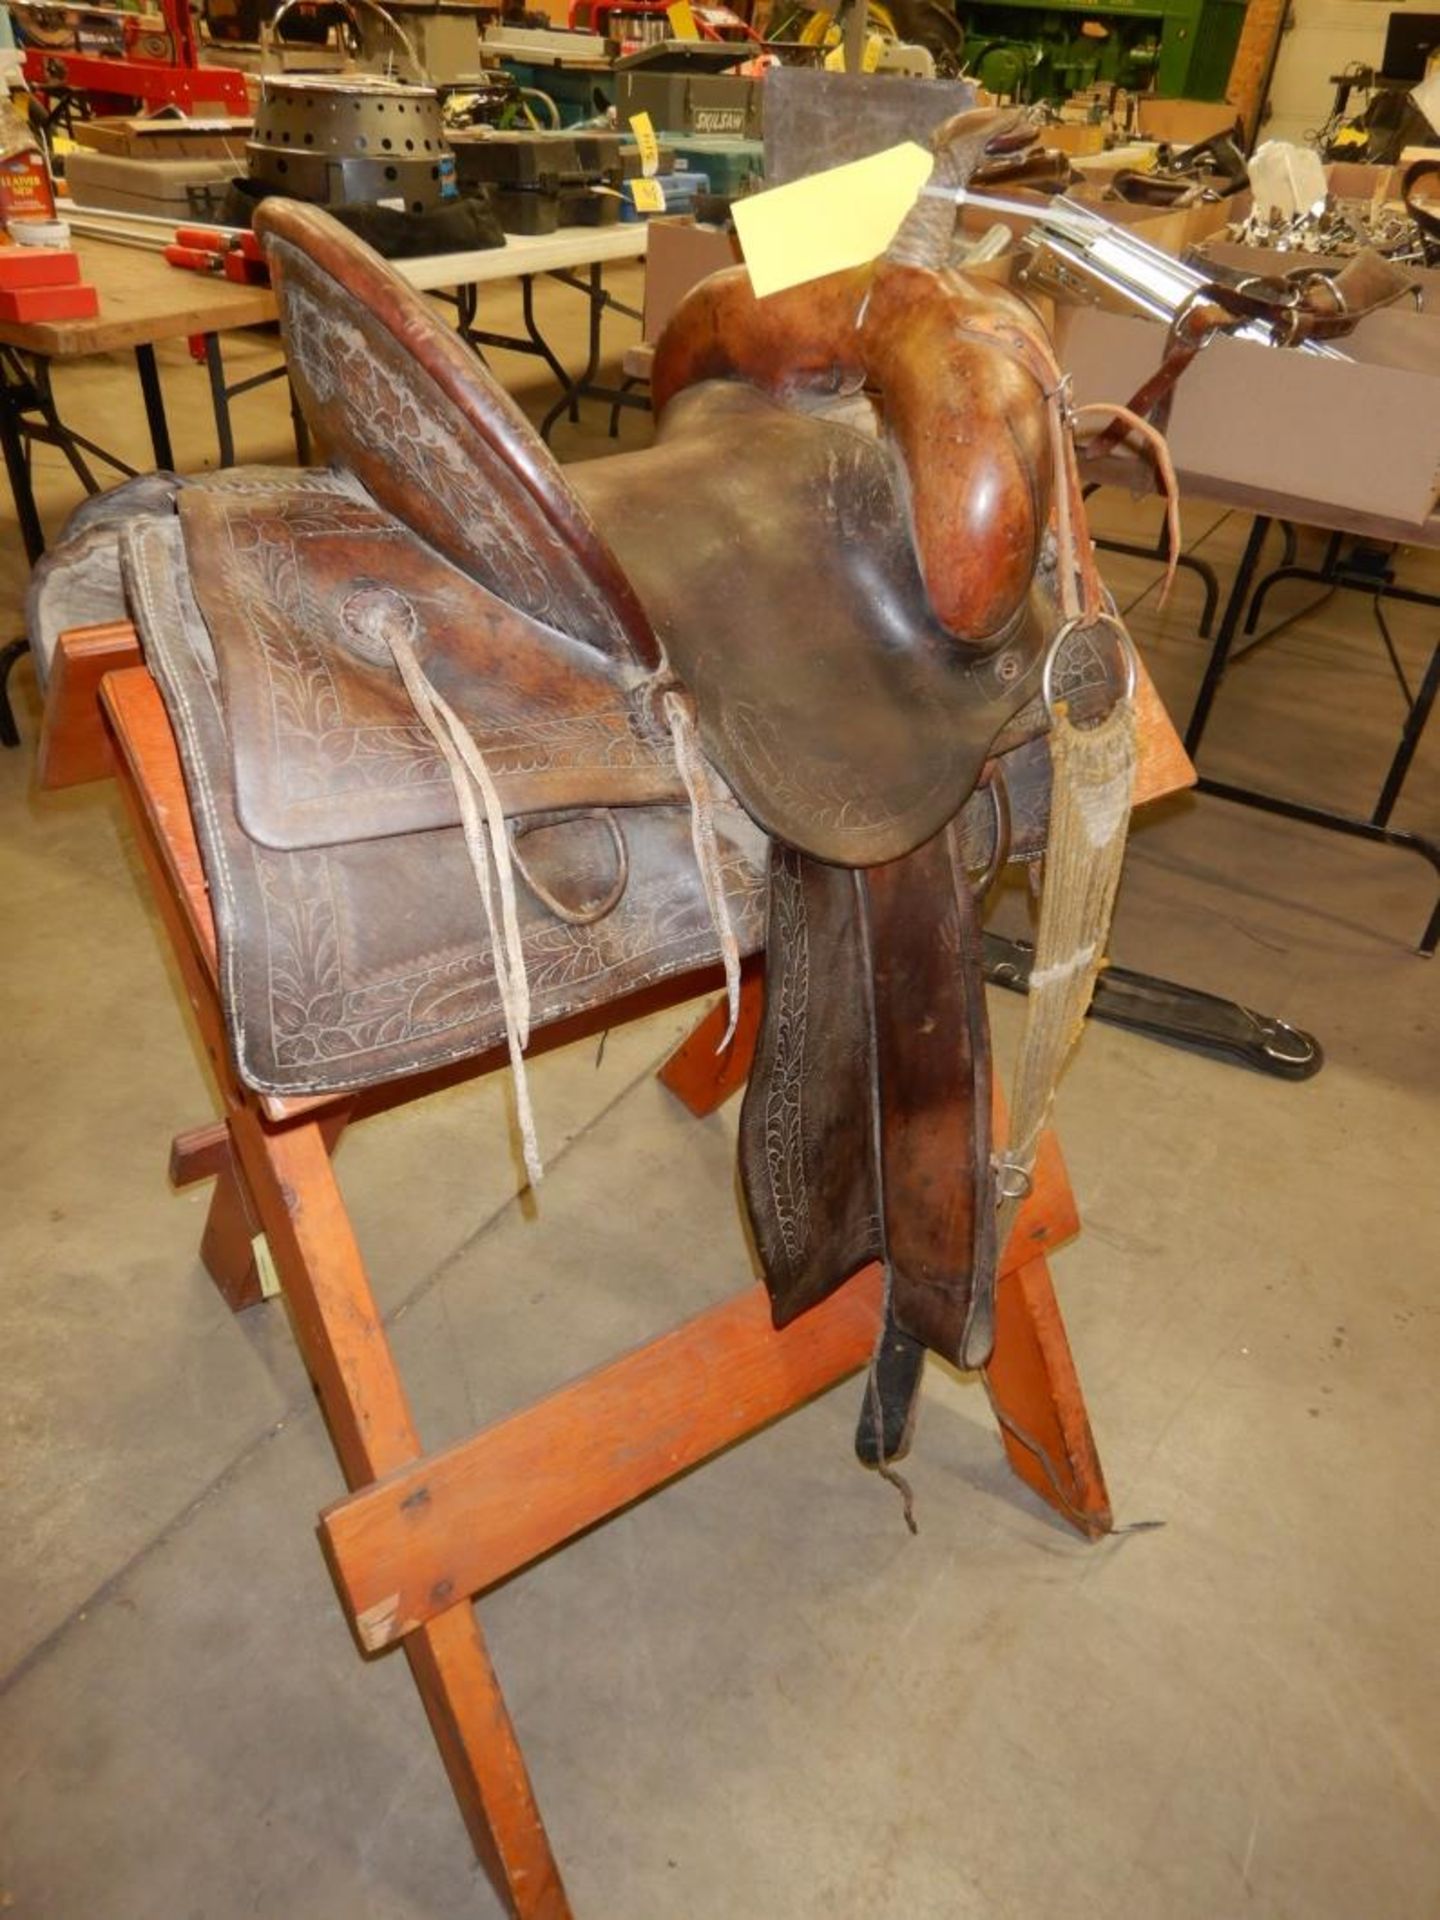 VINTAGE 14" WESTERN STOCK SADDLE, DBL RIG, RAWHIDE TREE, 15" FORKS, 6" CANTLE, RAWHIDE COVERED - Image 2 of 9